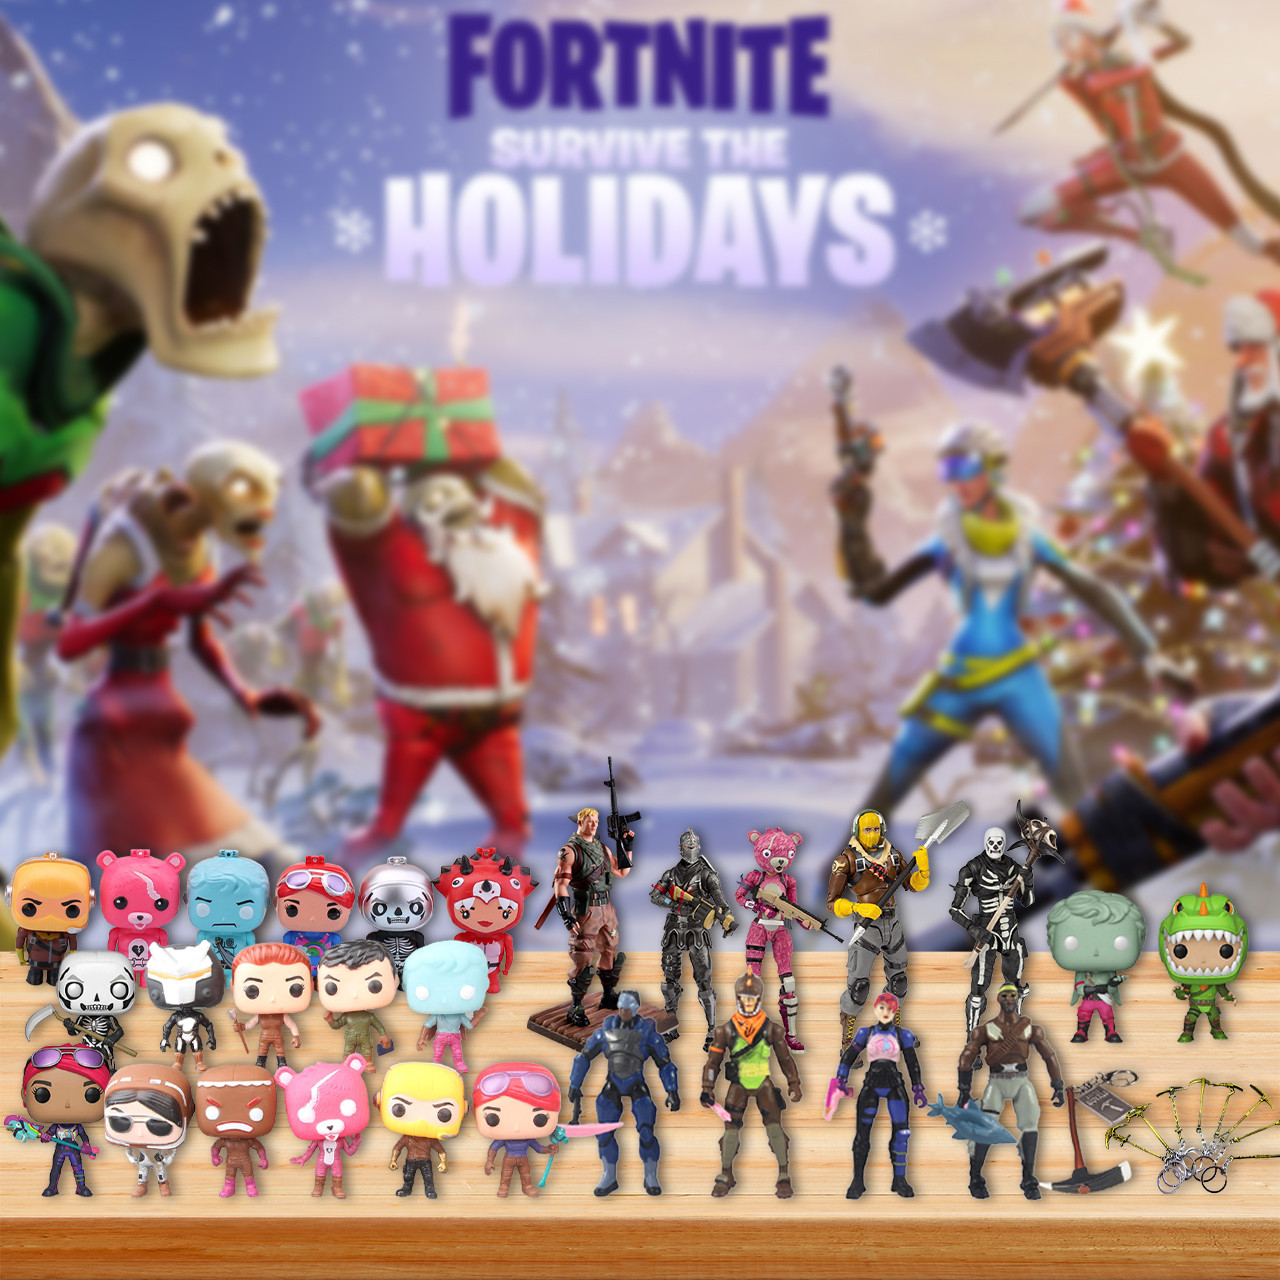 US 41.90 Fortnite Advent Calendar 2021 The One With 24 Little